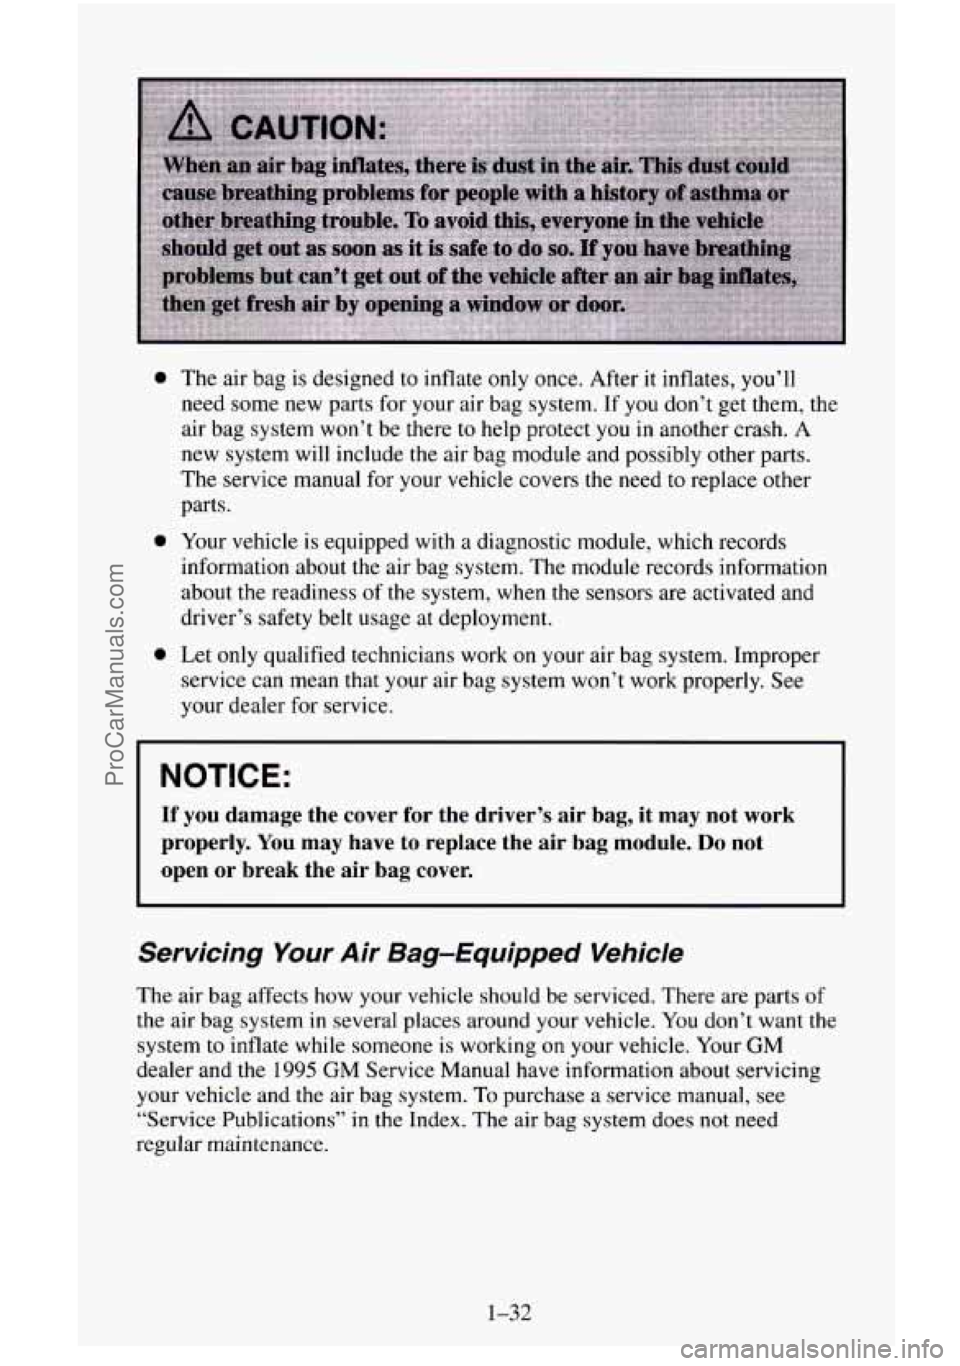 CHEVROLET SUBURBAN 1996  Owners Manual 0 
0 
0 
The  air  bag is designed to inflate only once.  After it inflates, you’ll 
need some new parts  for your  air bag  system.  If you  don’t  get them, the 
air  bag system  won’t  be the